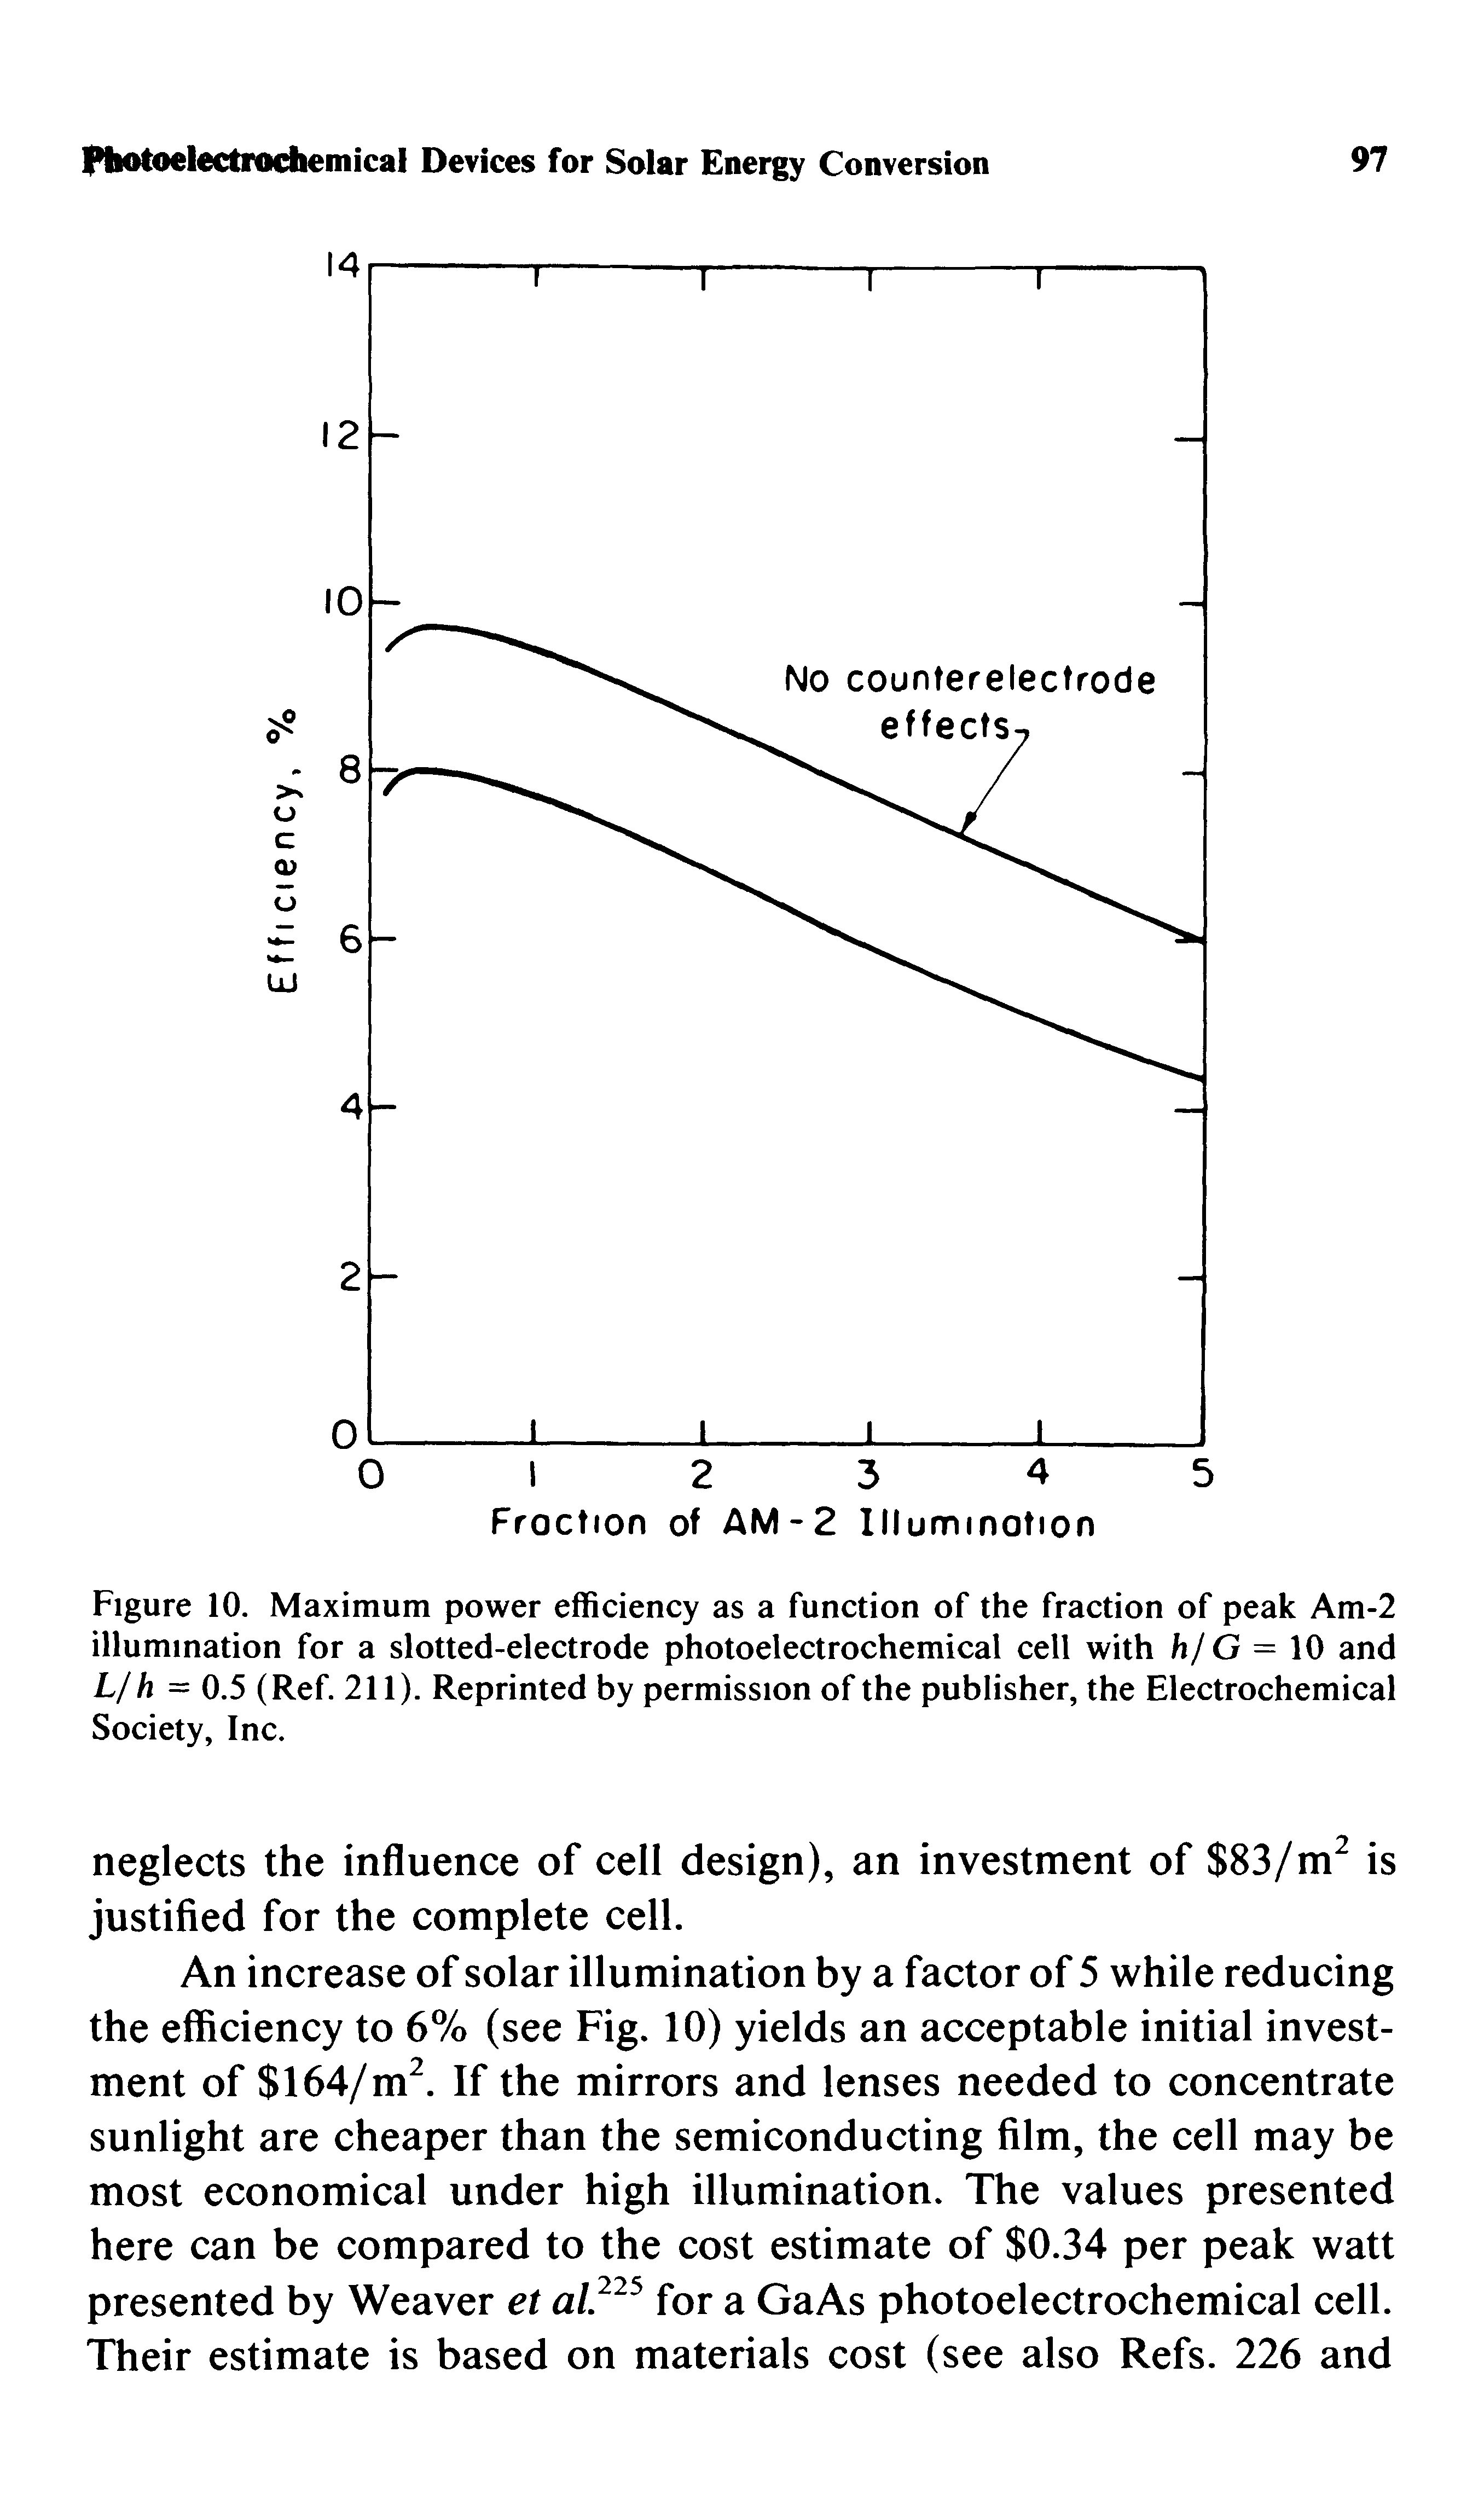 Figure 10. Maximum power efficiency as a function of the fraction of peak Am-2 illumination for a slotted-electrode photoelectrochemical cell with h/ G = 10 and L/h = 0.5 (Ref. 211). Reprinted by permission of the publisher, the Electrochemical Society, Inc.